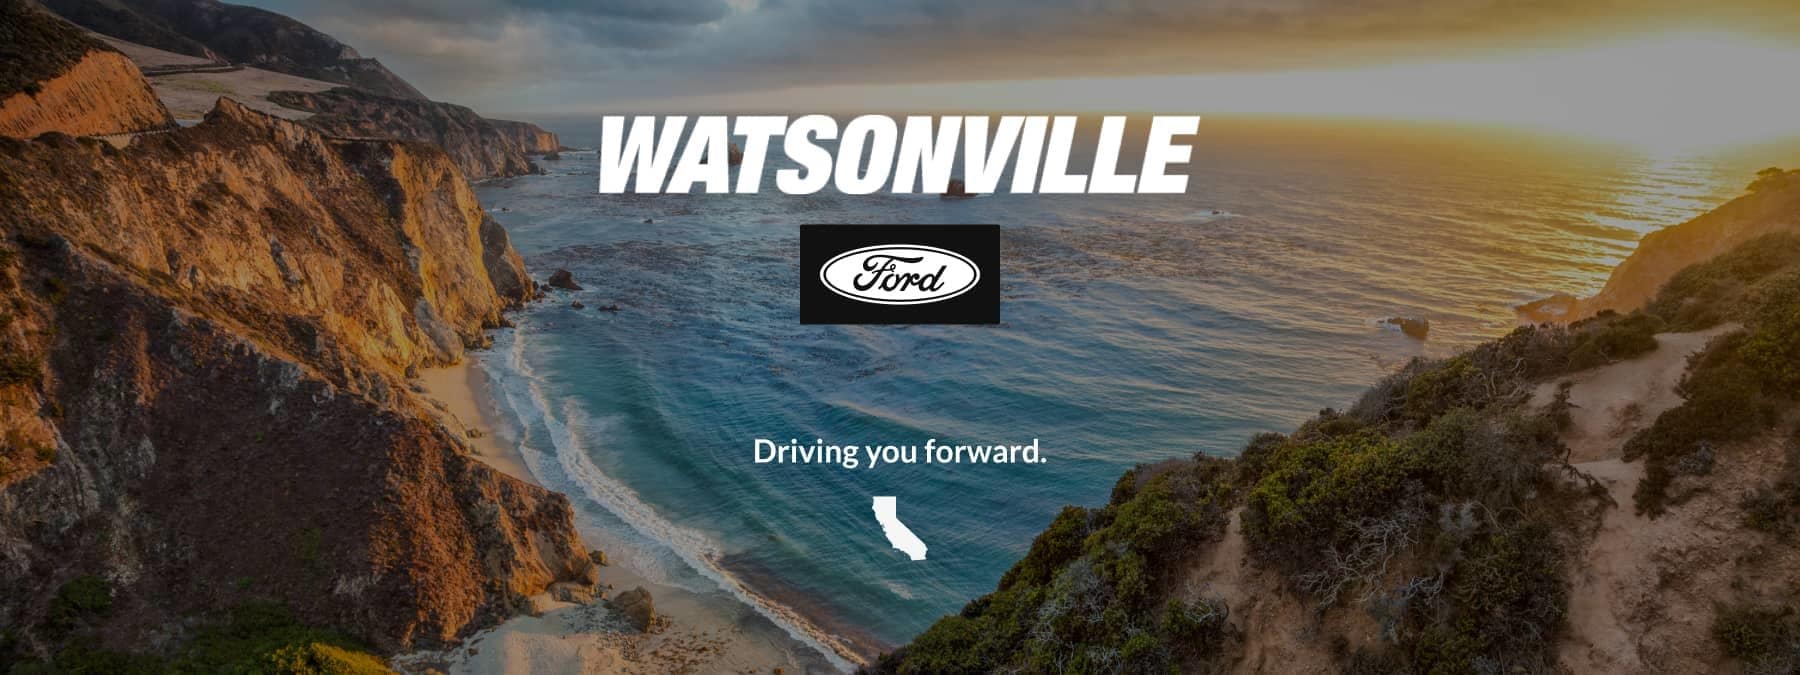 Watsonville Ford - Driving you forward